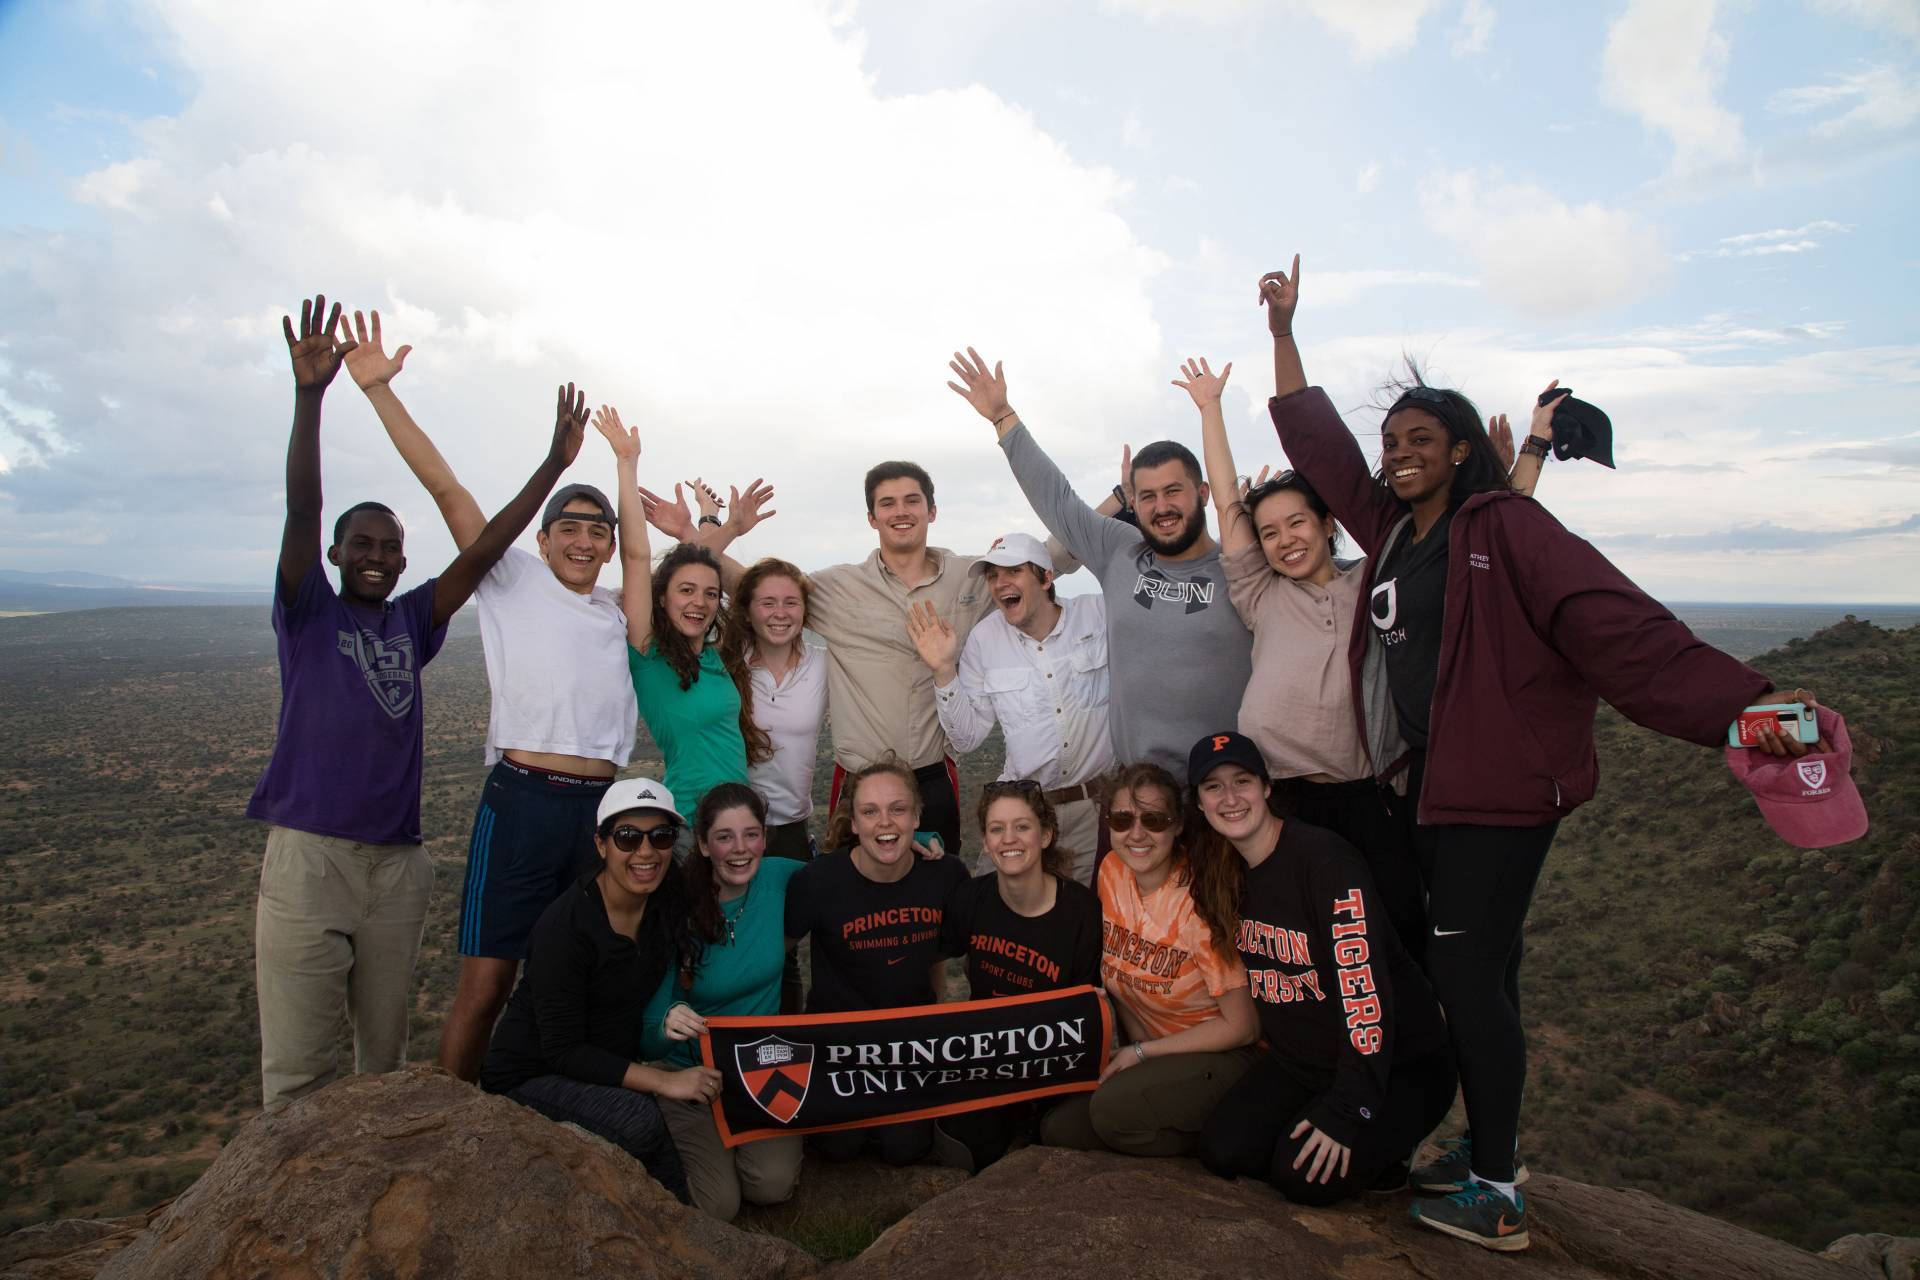 Students reach a summit after a hike